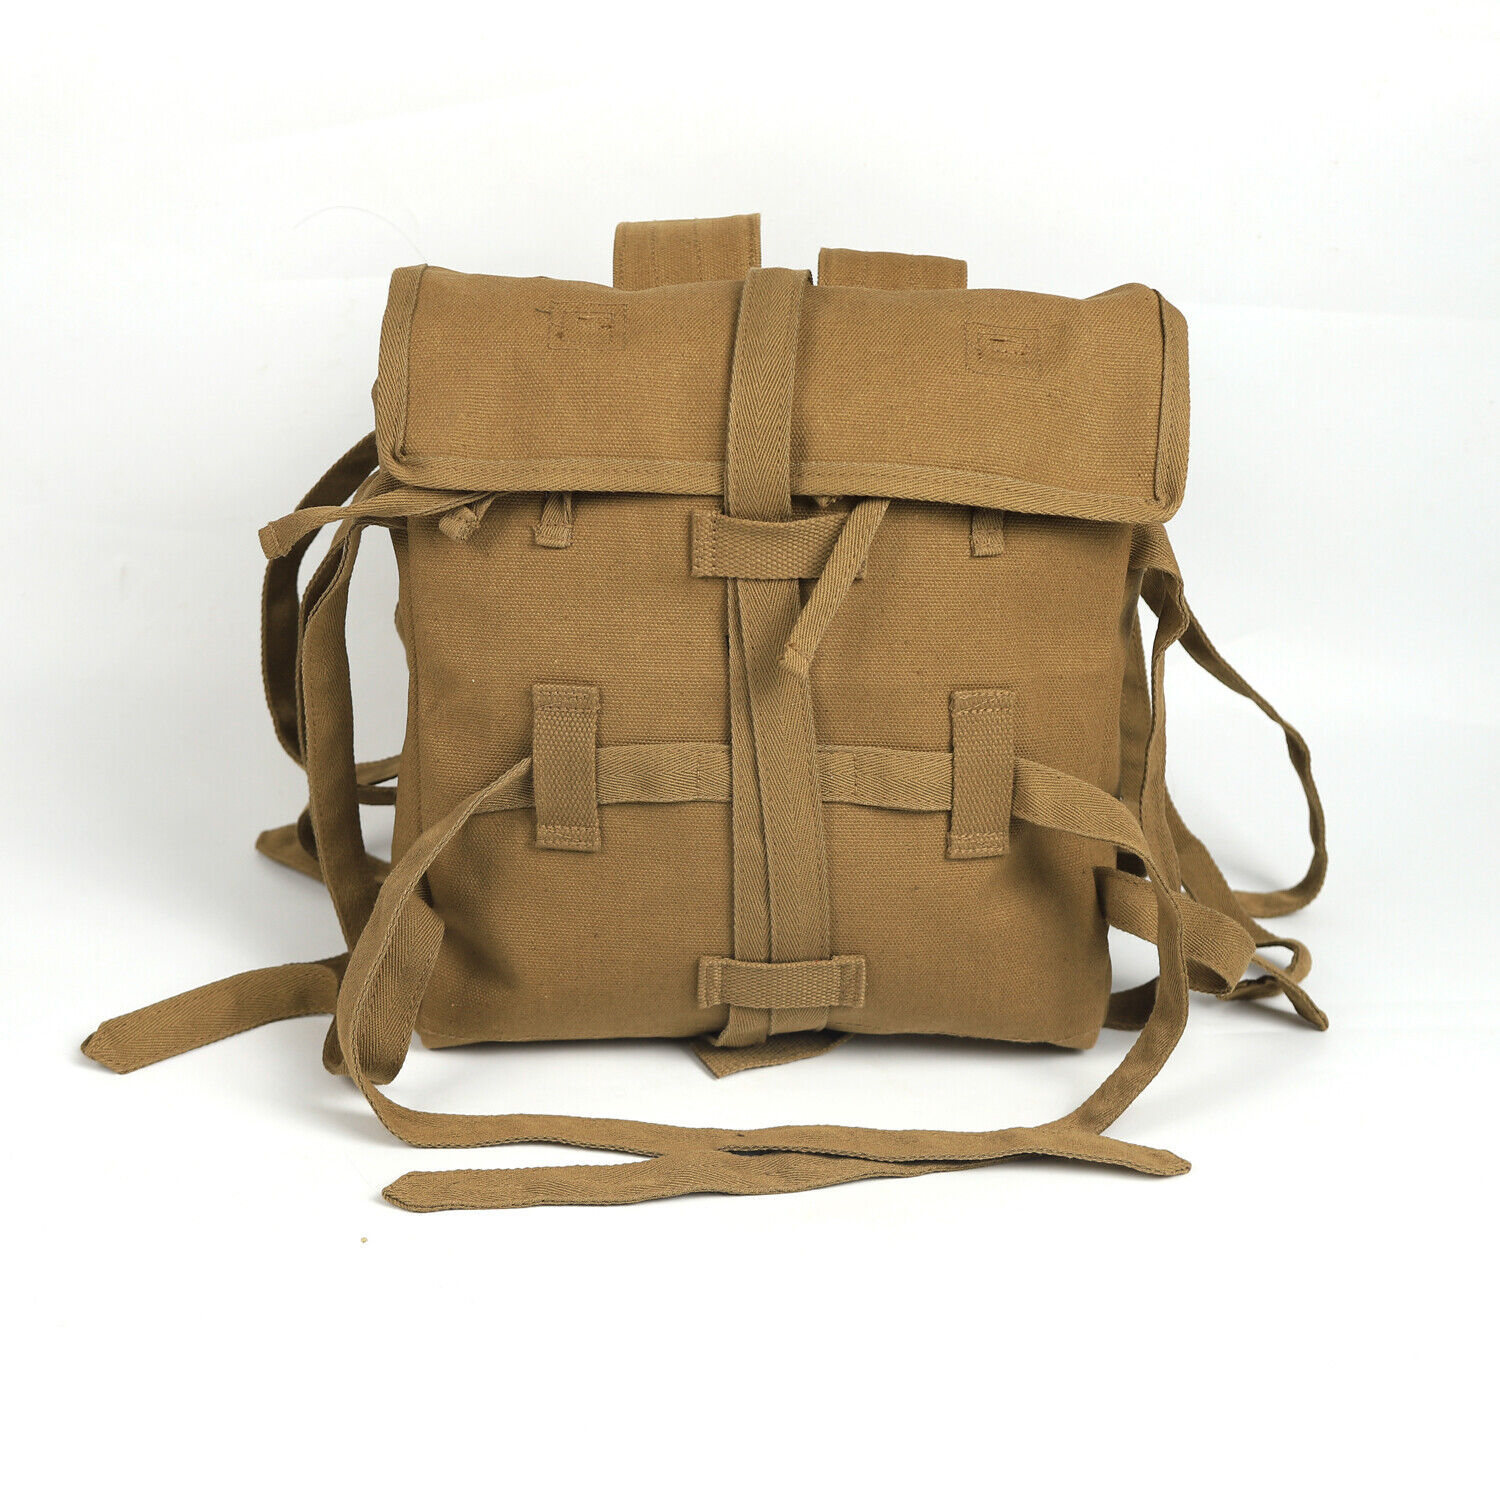 WW2 JAPANESE BACKPACK  M1940 CANVAS BAG SACK ARMY FIELD WWII